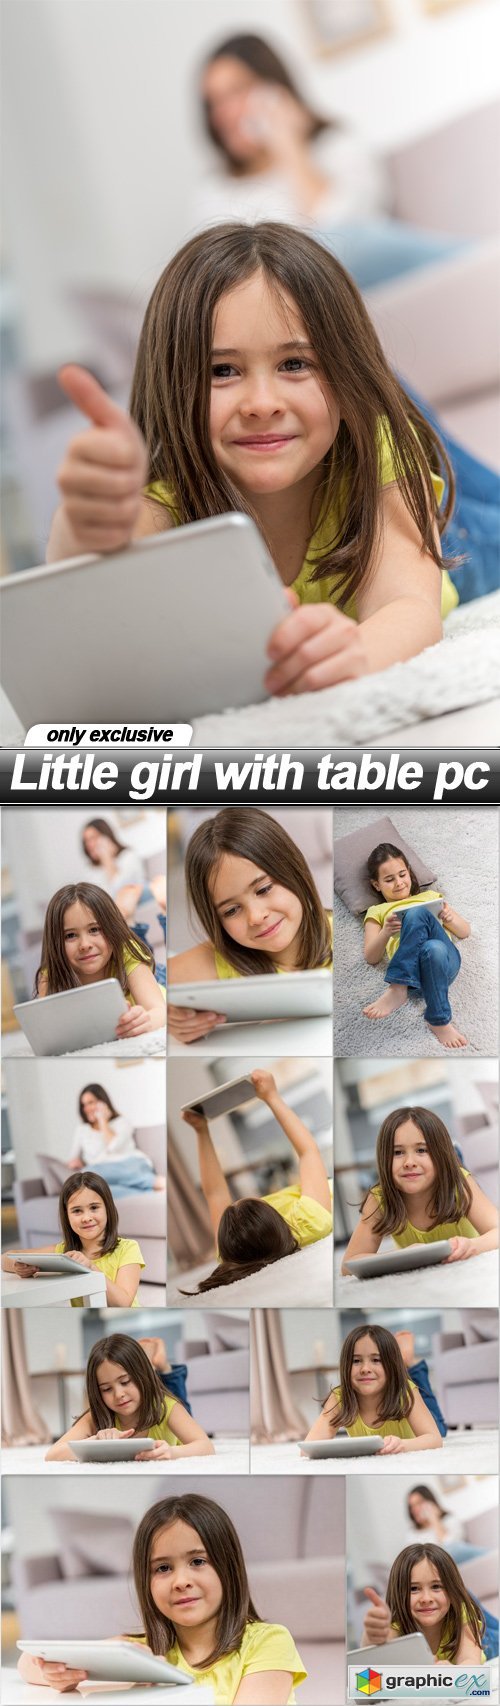 Little girl with table pc - 10 UHQ JPEG